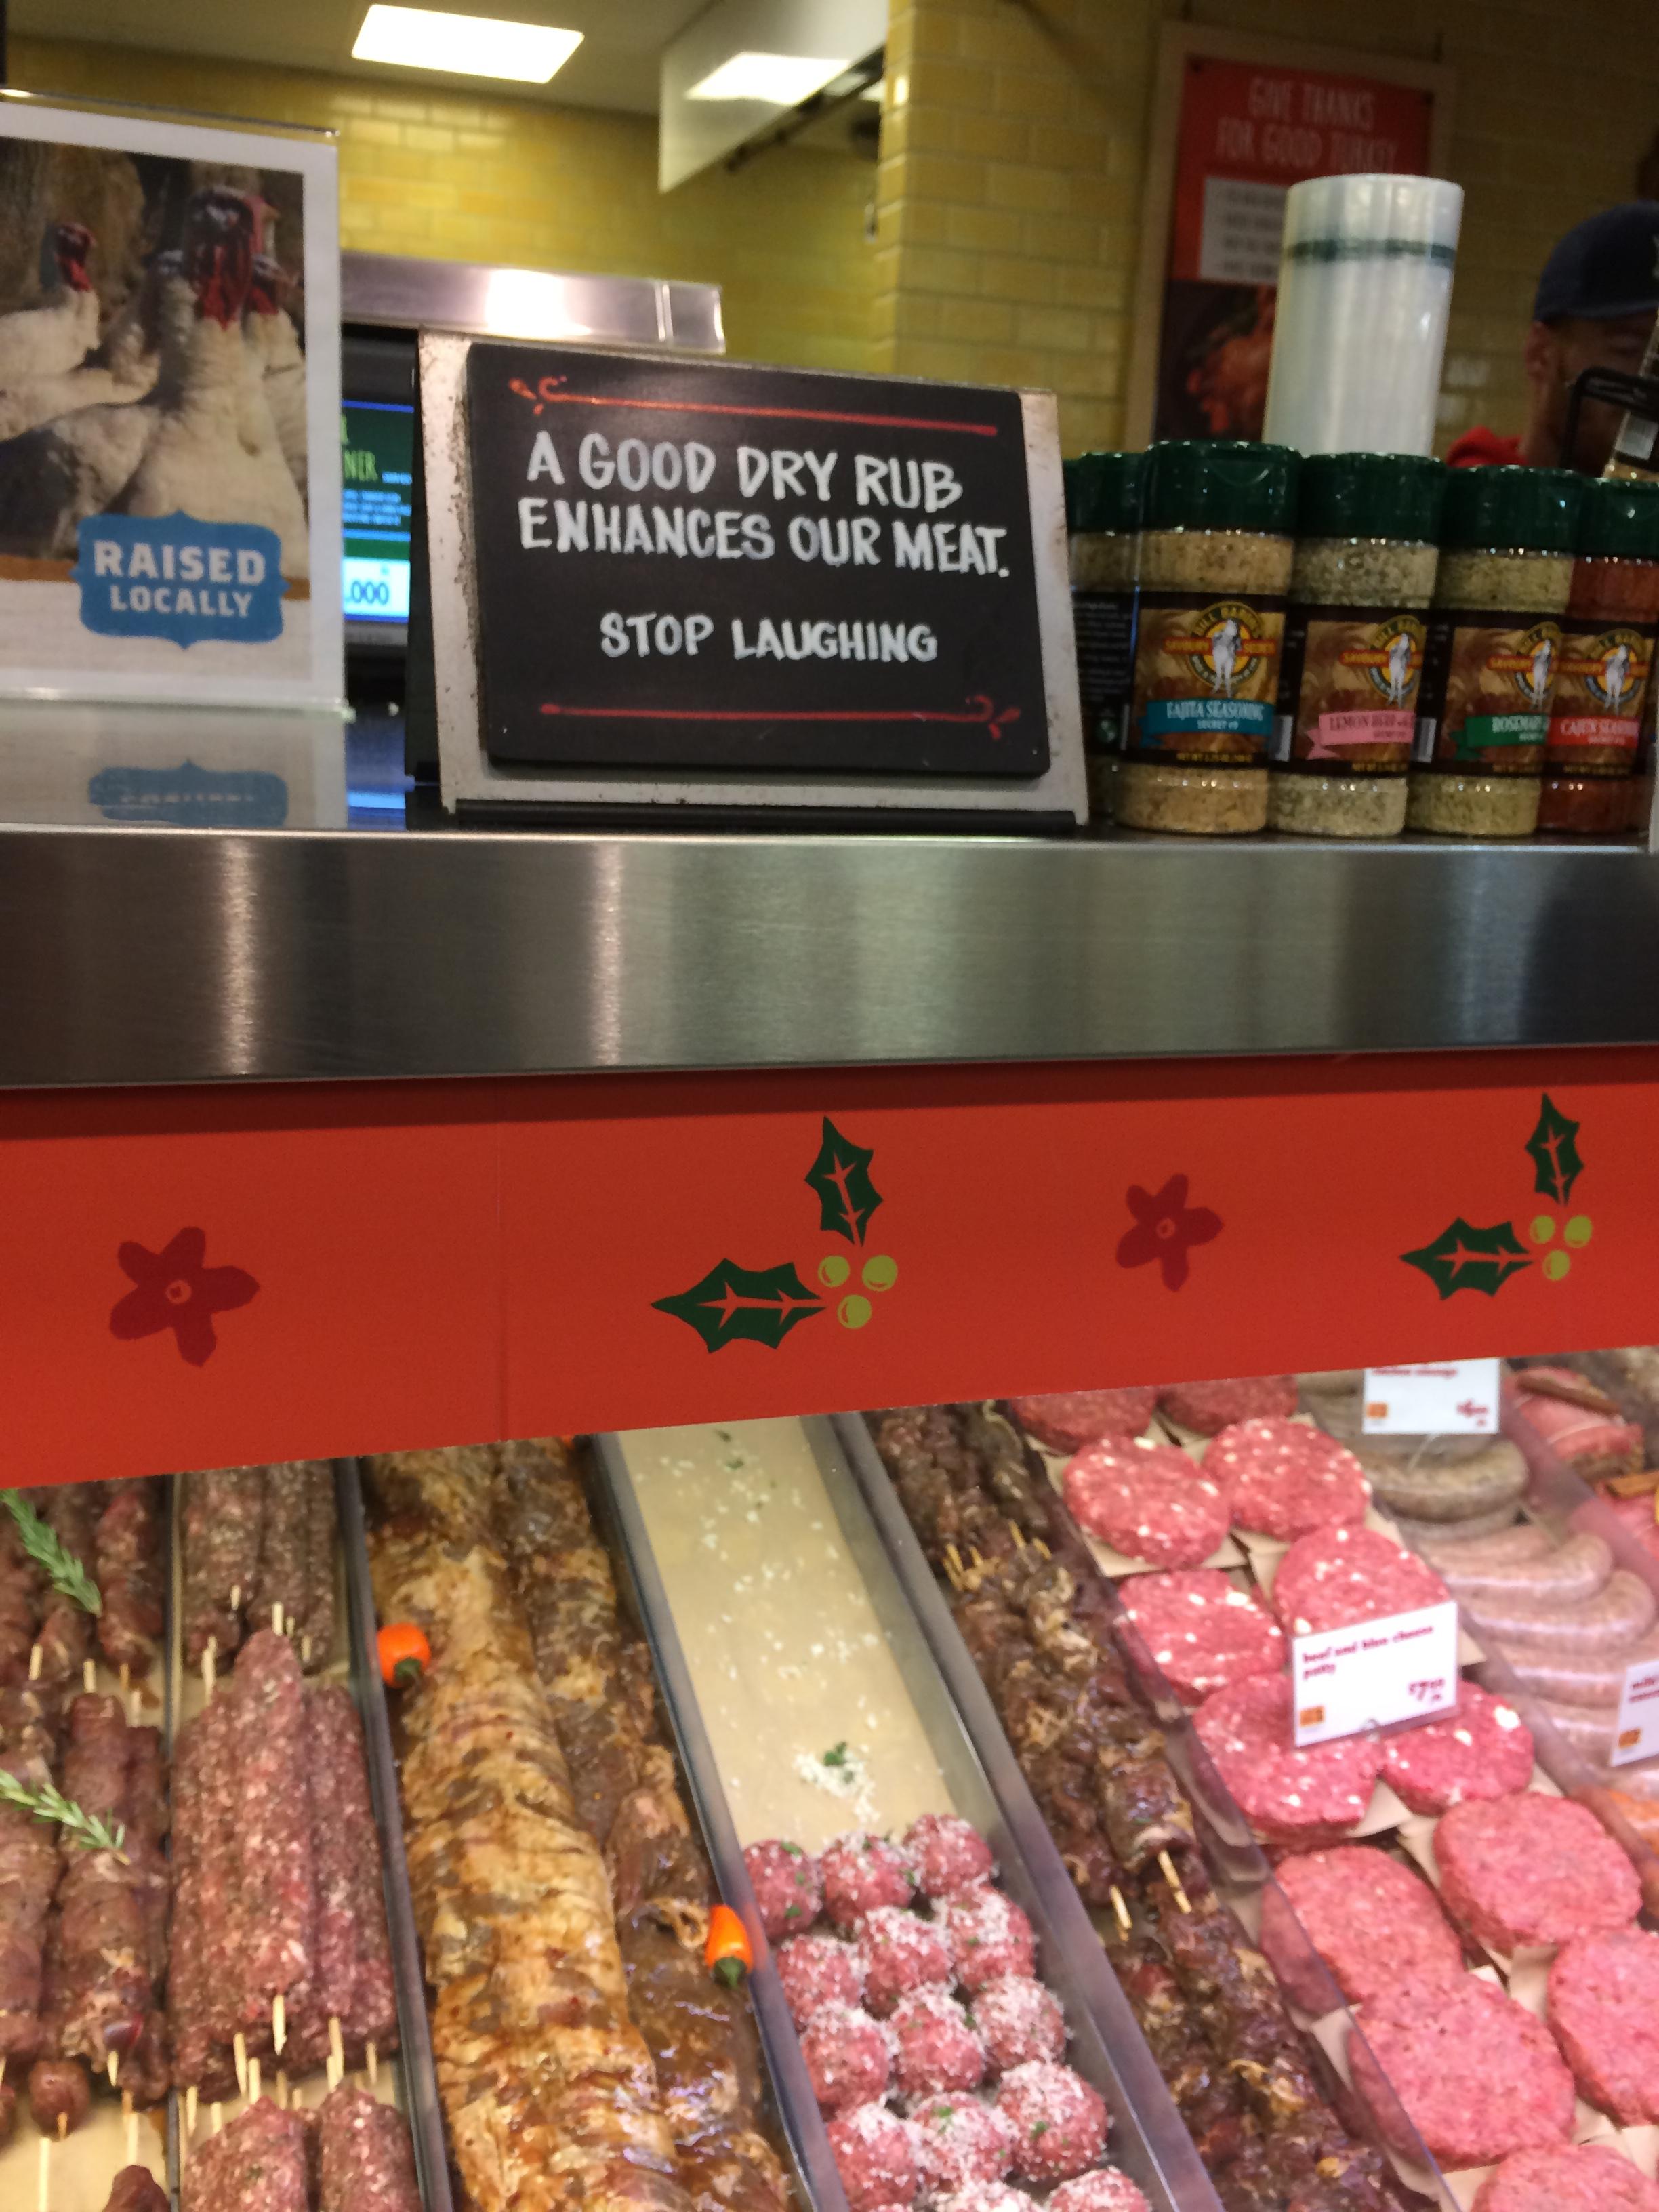 butcher jokes - Raised Locally A Good Dry Rub Enhances Our Meat. Stop Laughing